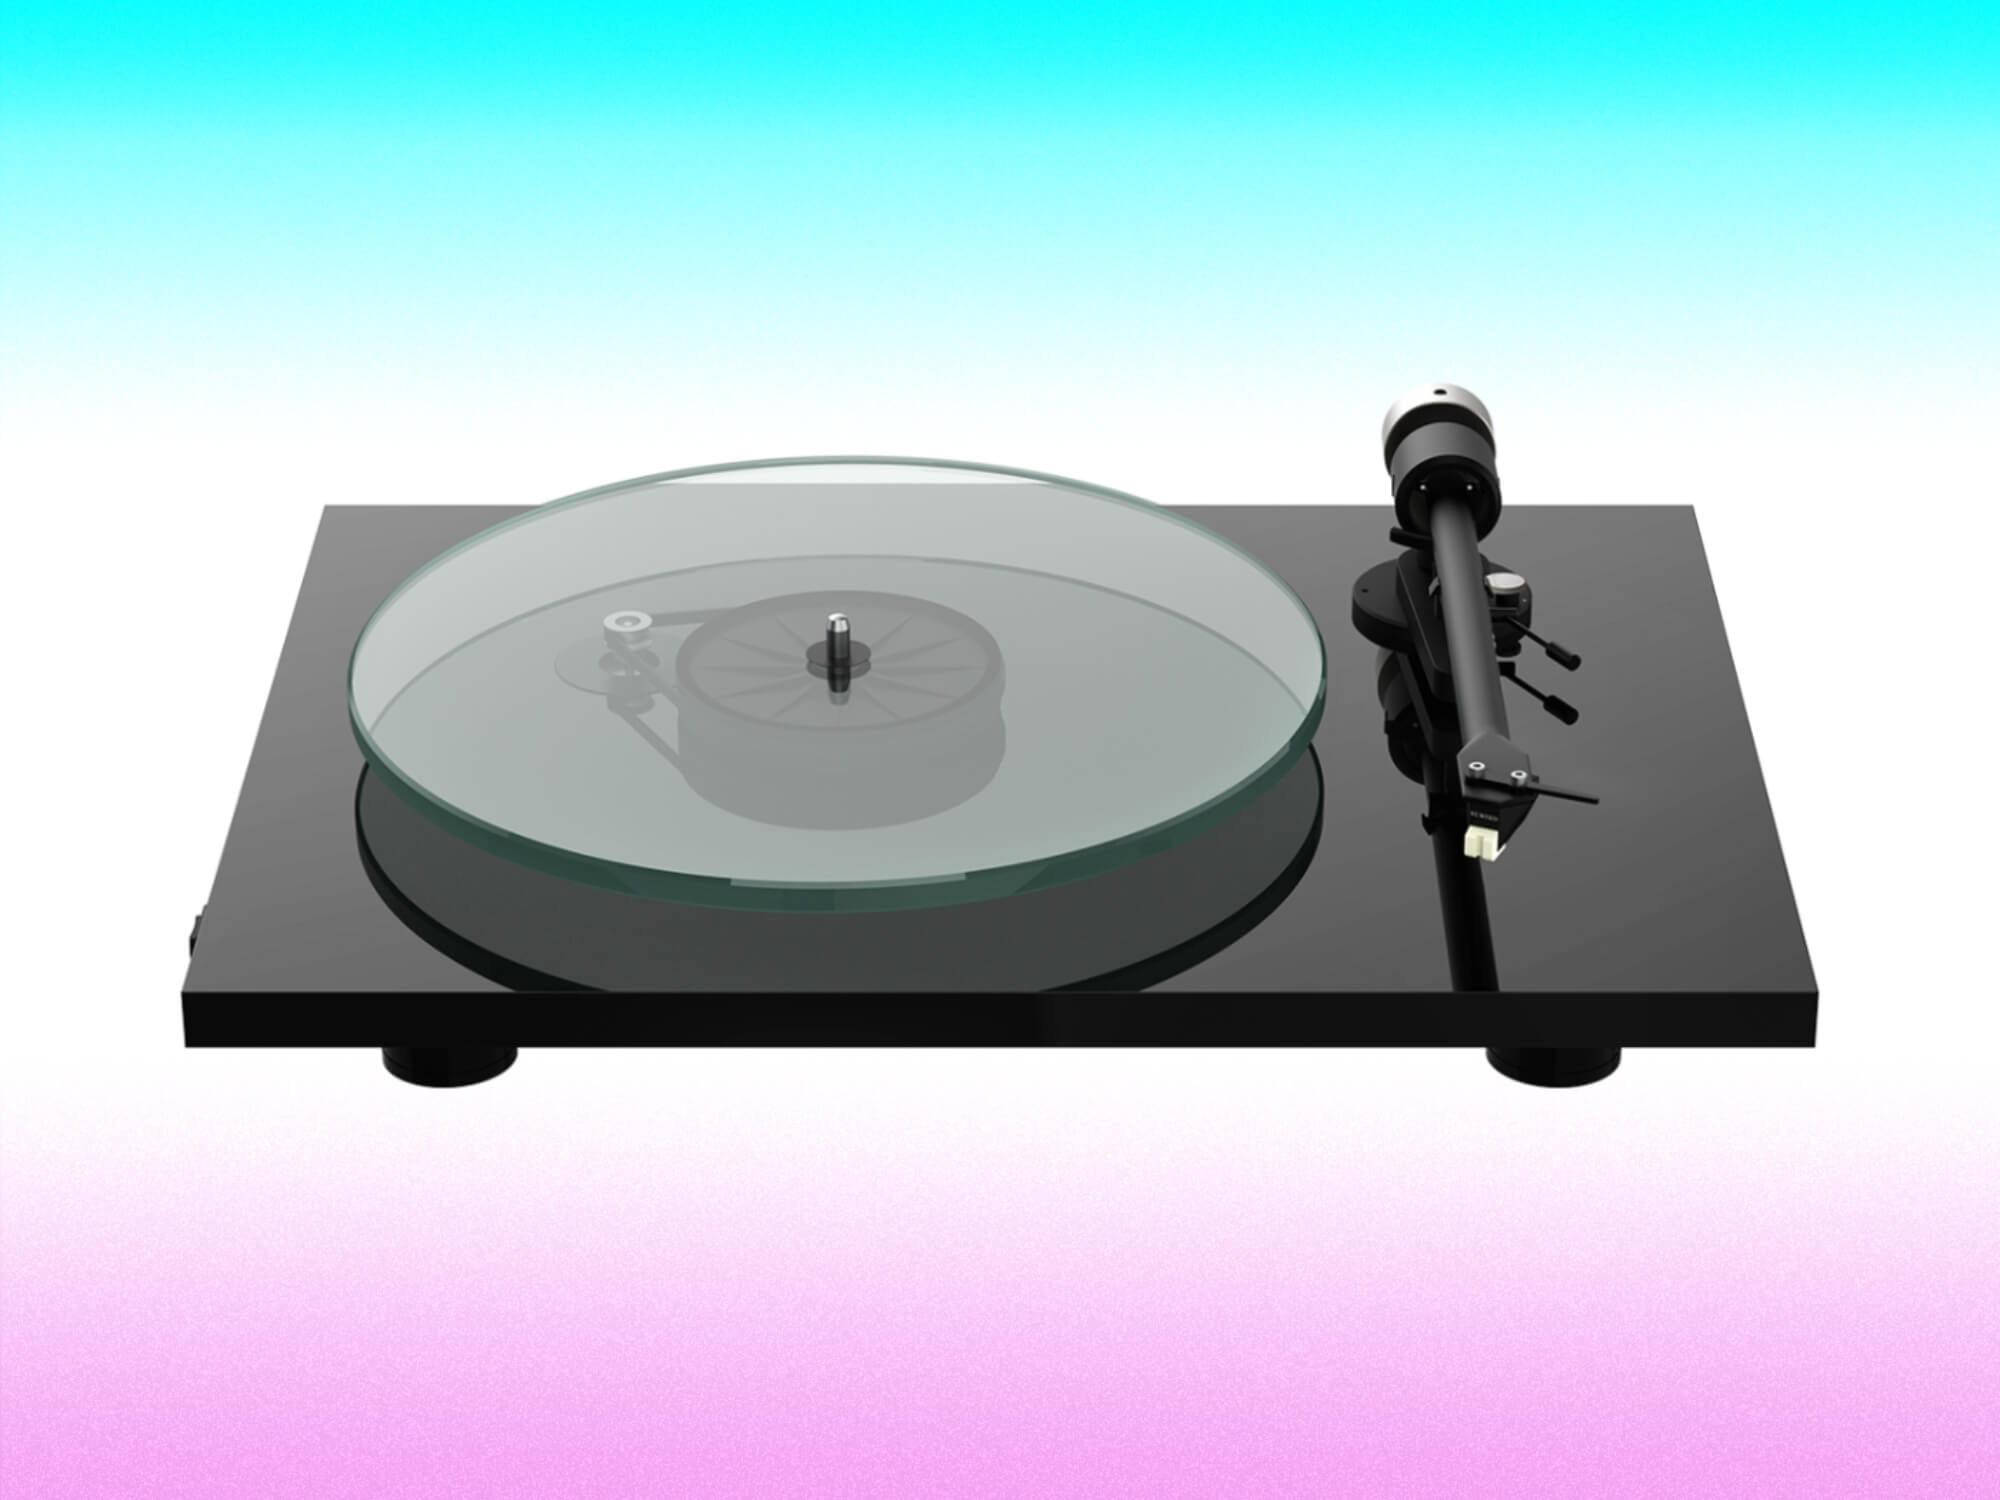 Pro-Ject T2 W Turntable